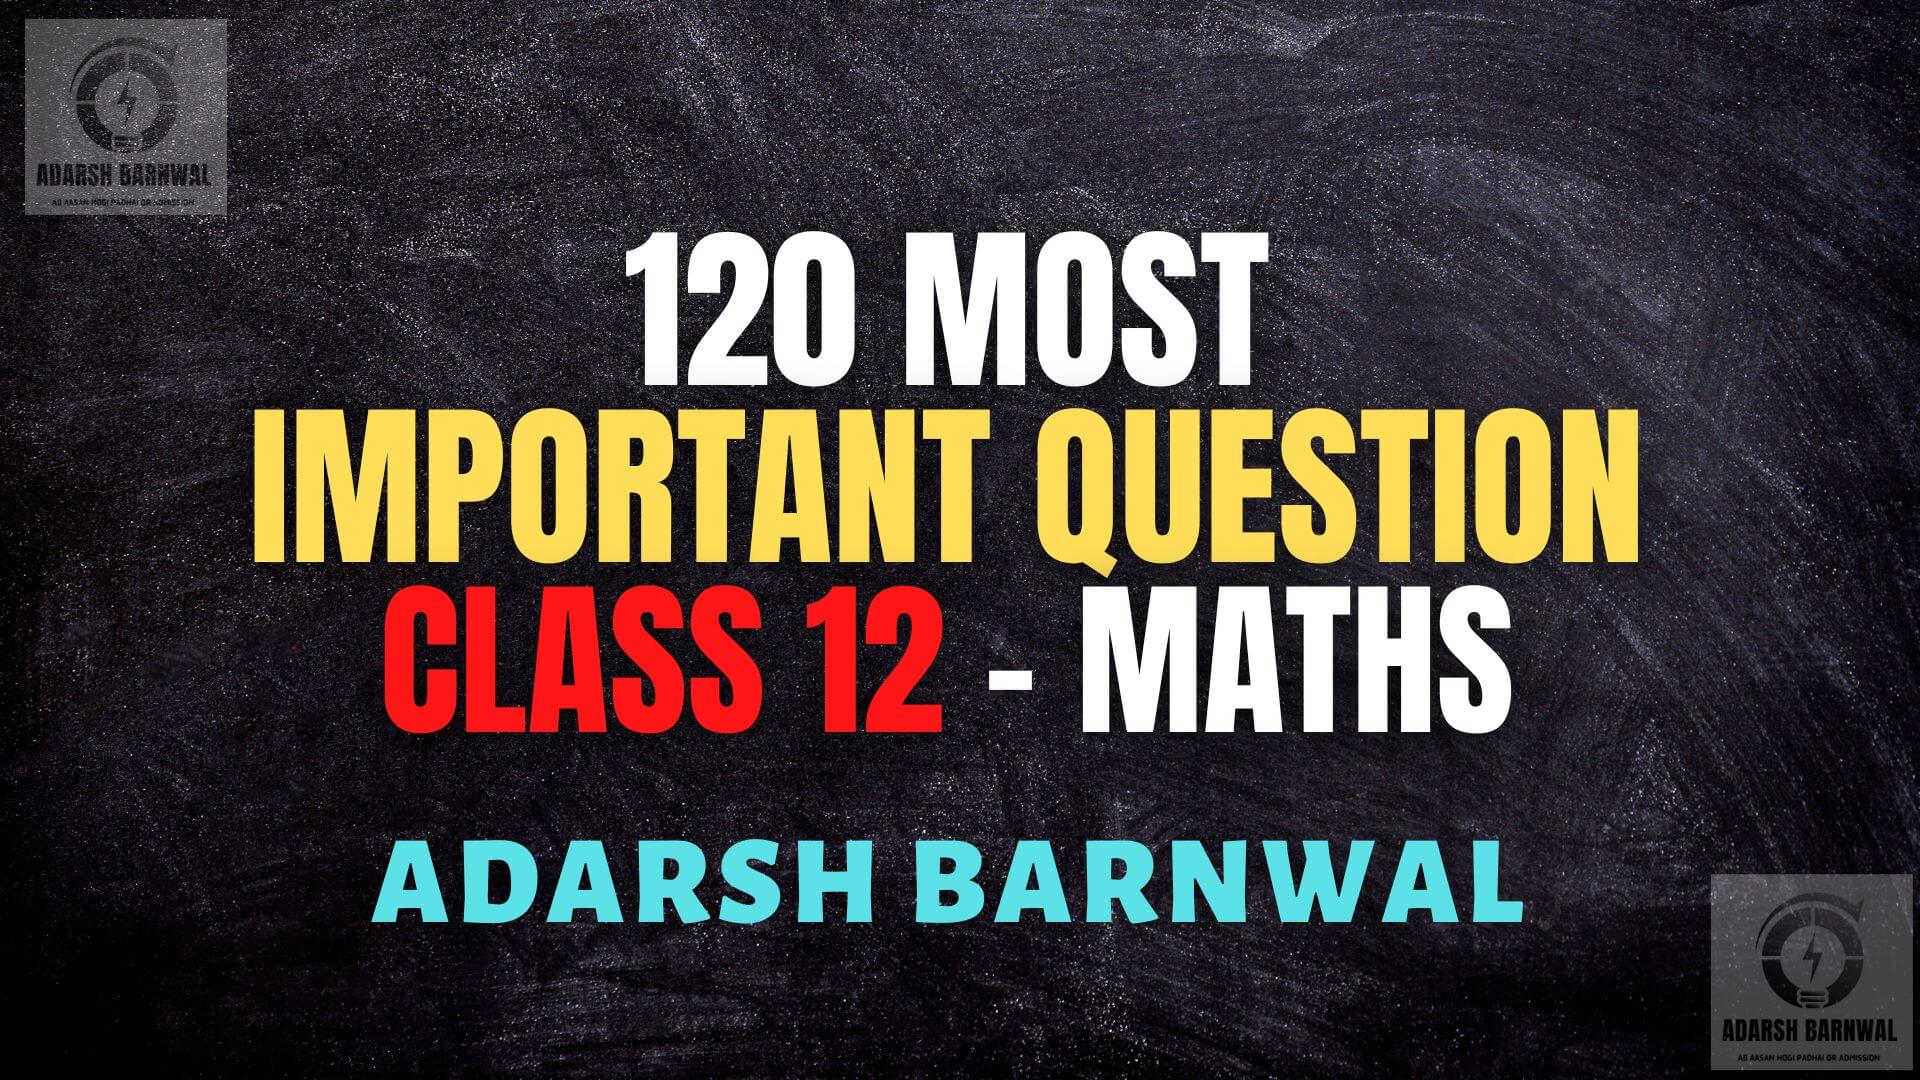 Maths Class 12 Important questions with solution by adarsh barnwal